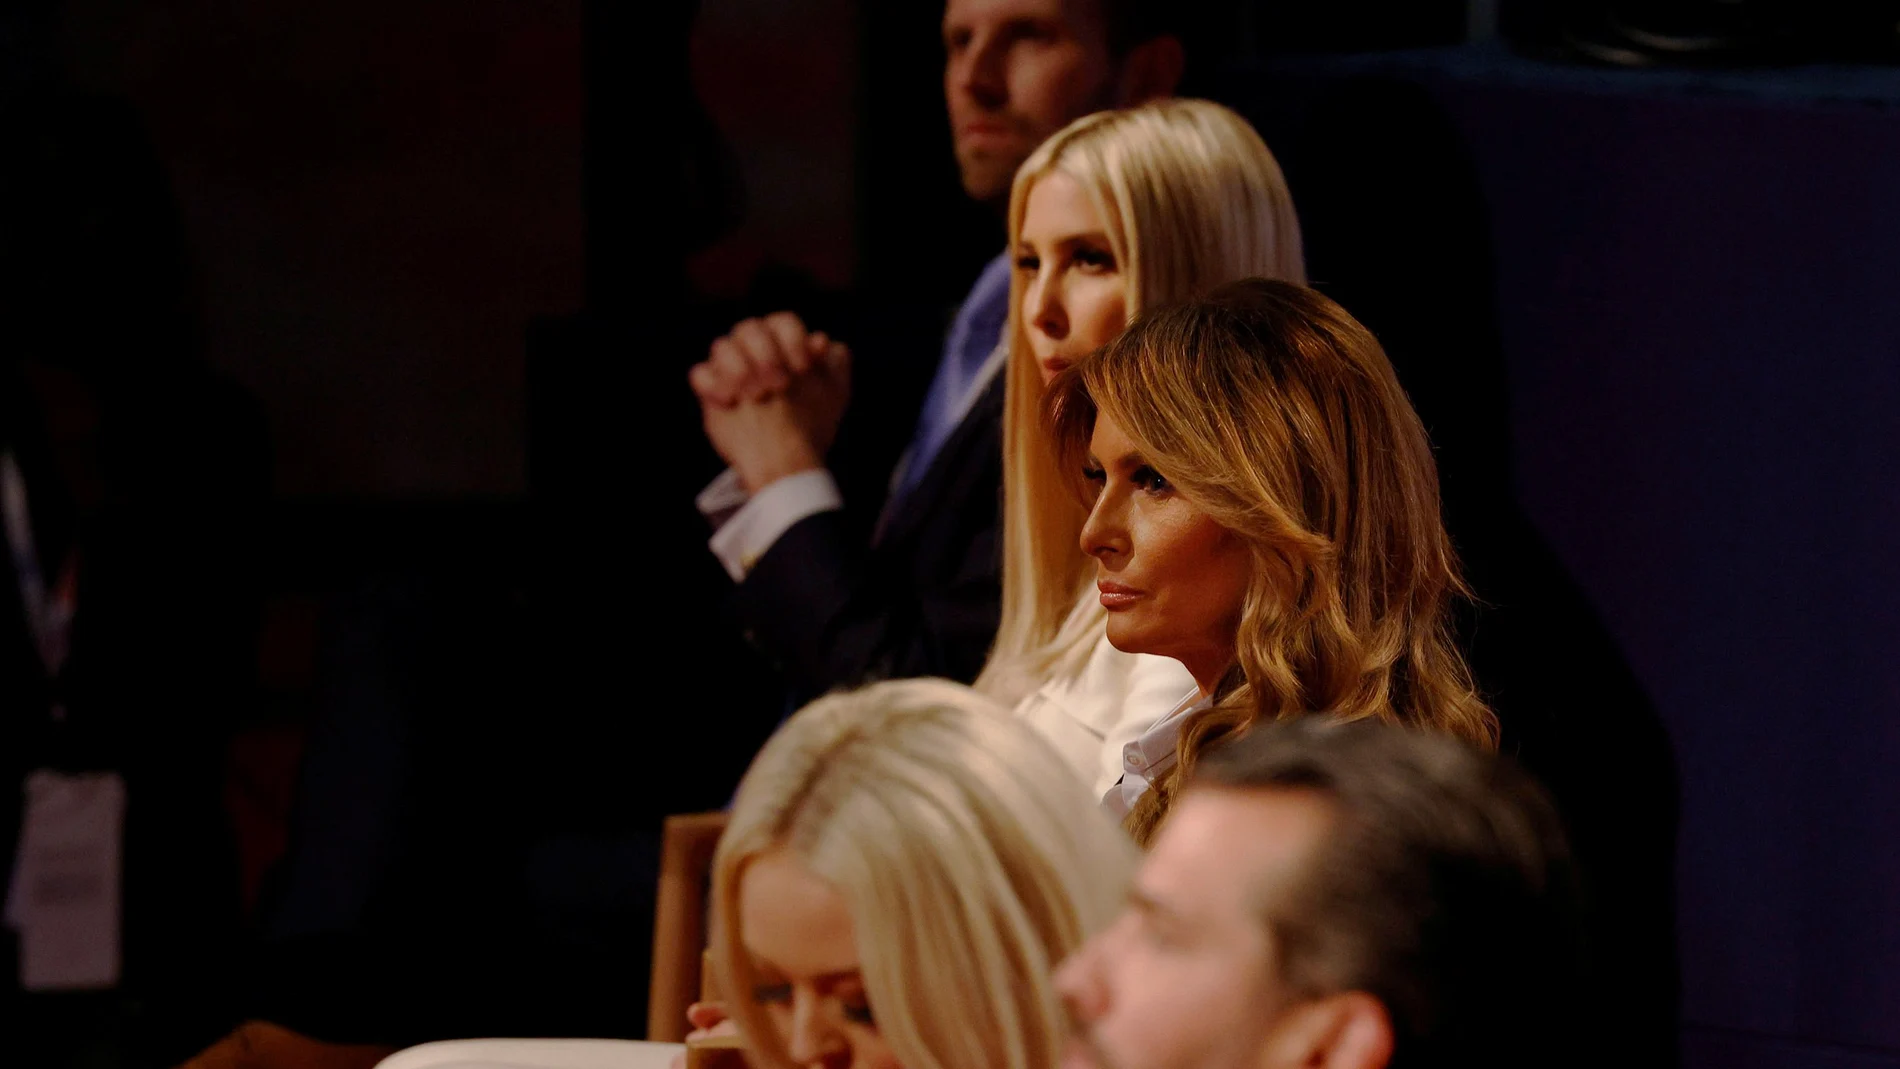 U.S. first lady Melania Trump watches after taking off her face mask while sitting with the rest of the Trump family, including Donald Trump Jr., Tiffany Trump, Ivanka Trump and Eric Trump, before the start of the first 2020 presidential campaign debate between U.S. President Donald Trump and Democratic presidential nominee Joe Biden in Cleveland, Ohio, U.S., September 29, 2020. Picture taken September 29, 2020. REUTERS/Brian Snyder